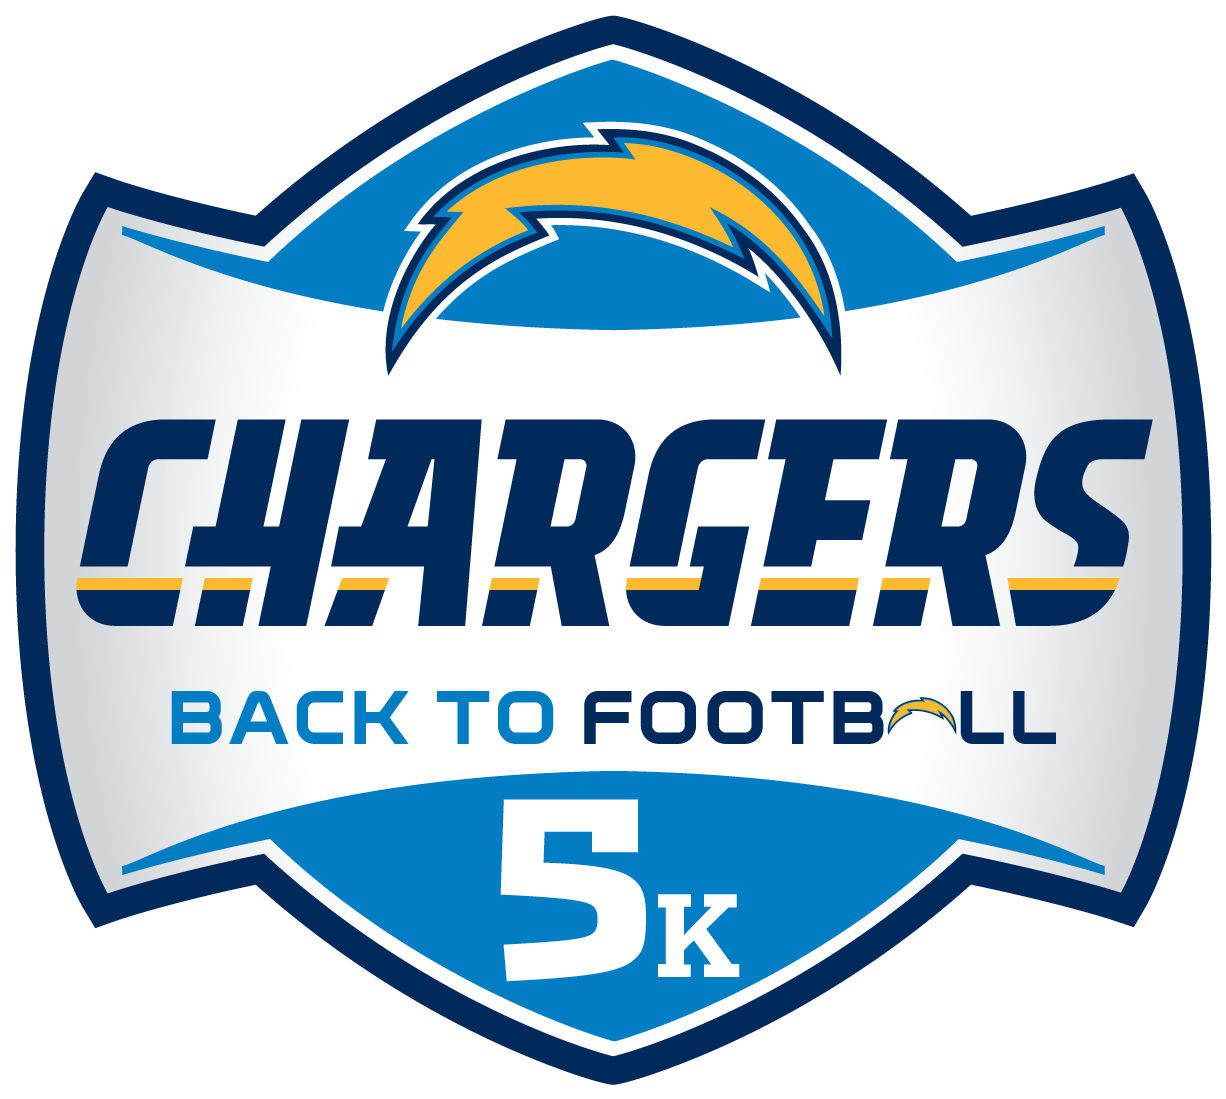 Chargers Back To Football5 K Logo PNG